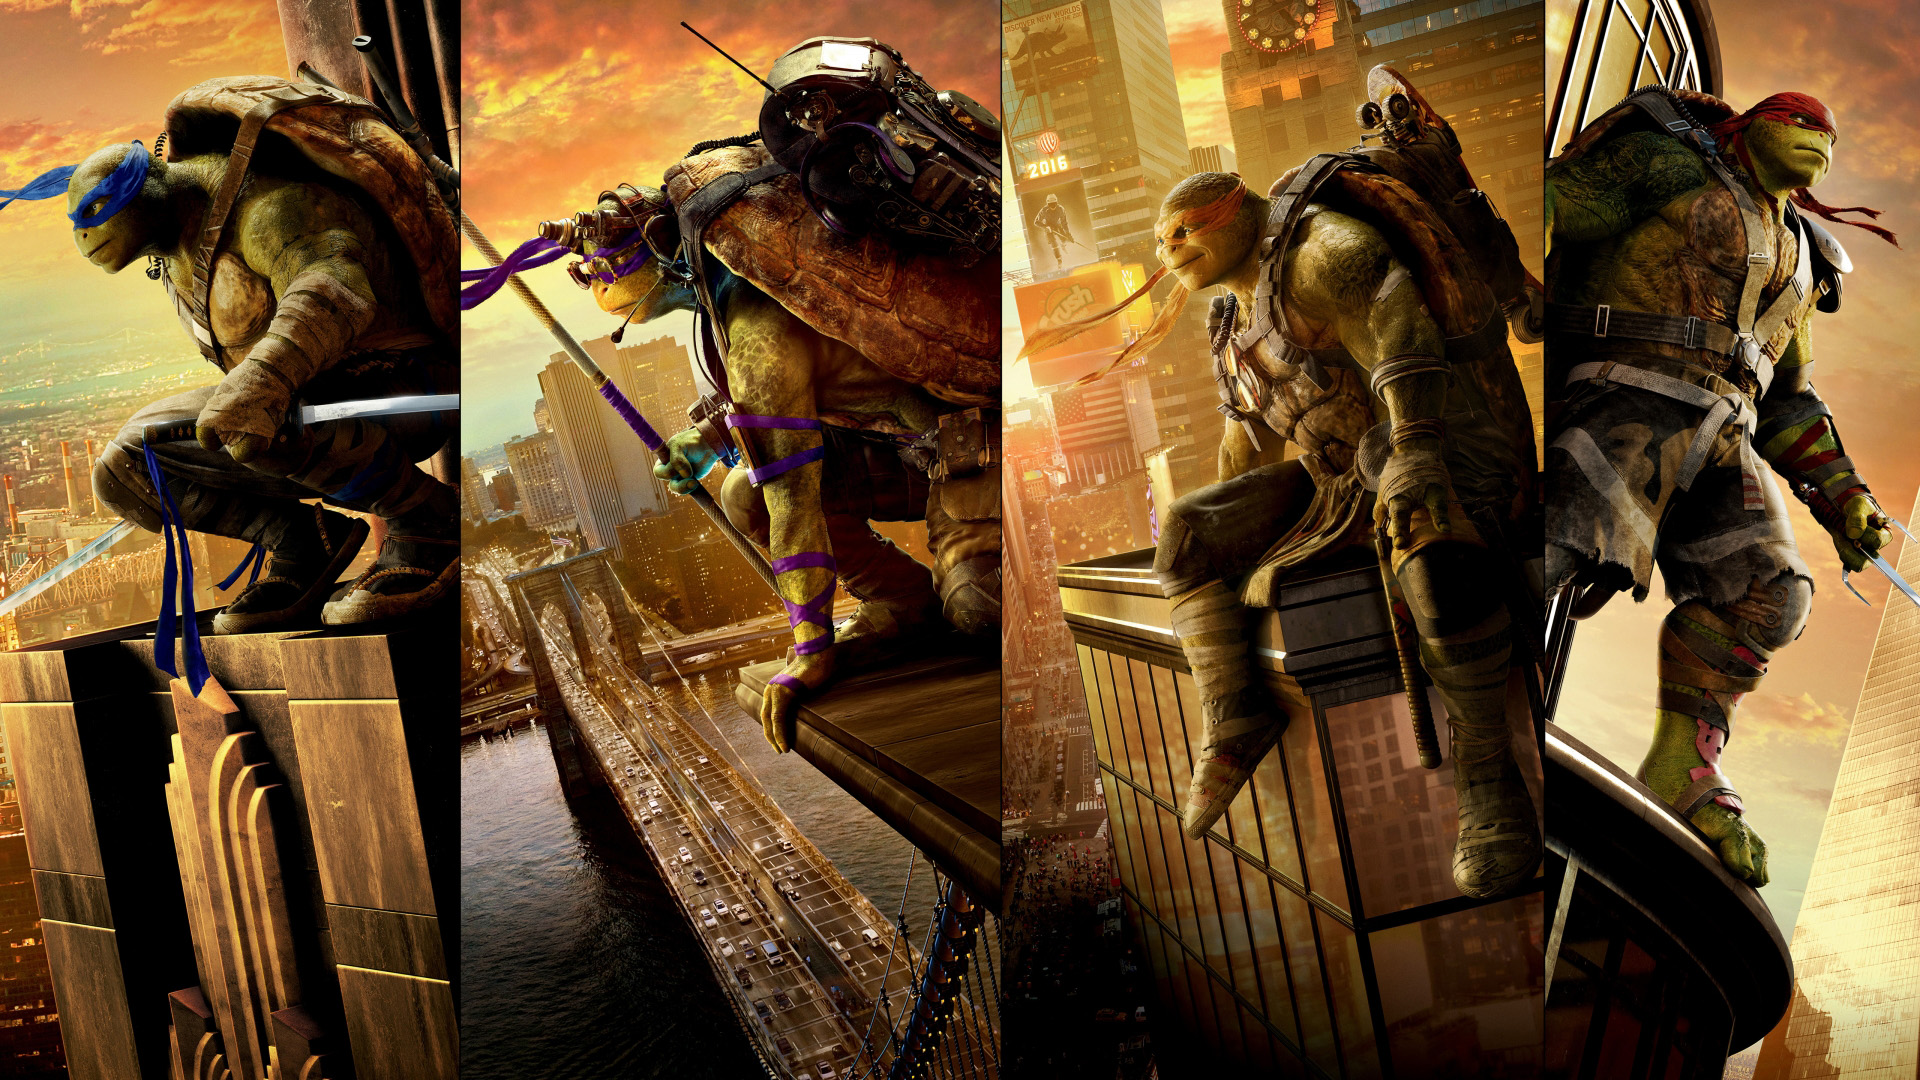 Movie Teenage Mutant Ninja Turtles: Out of the Shadows HD Wallpaper | Background Image